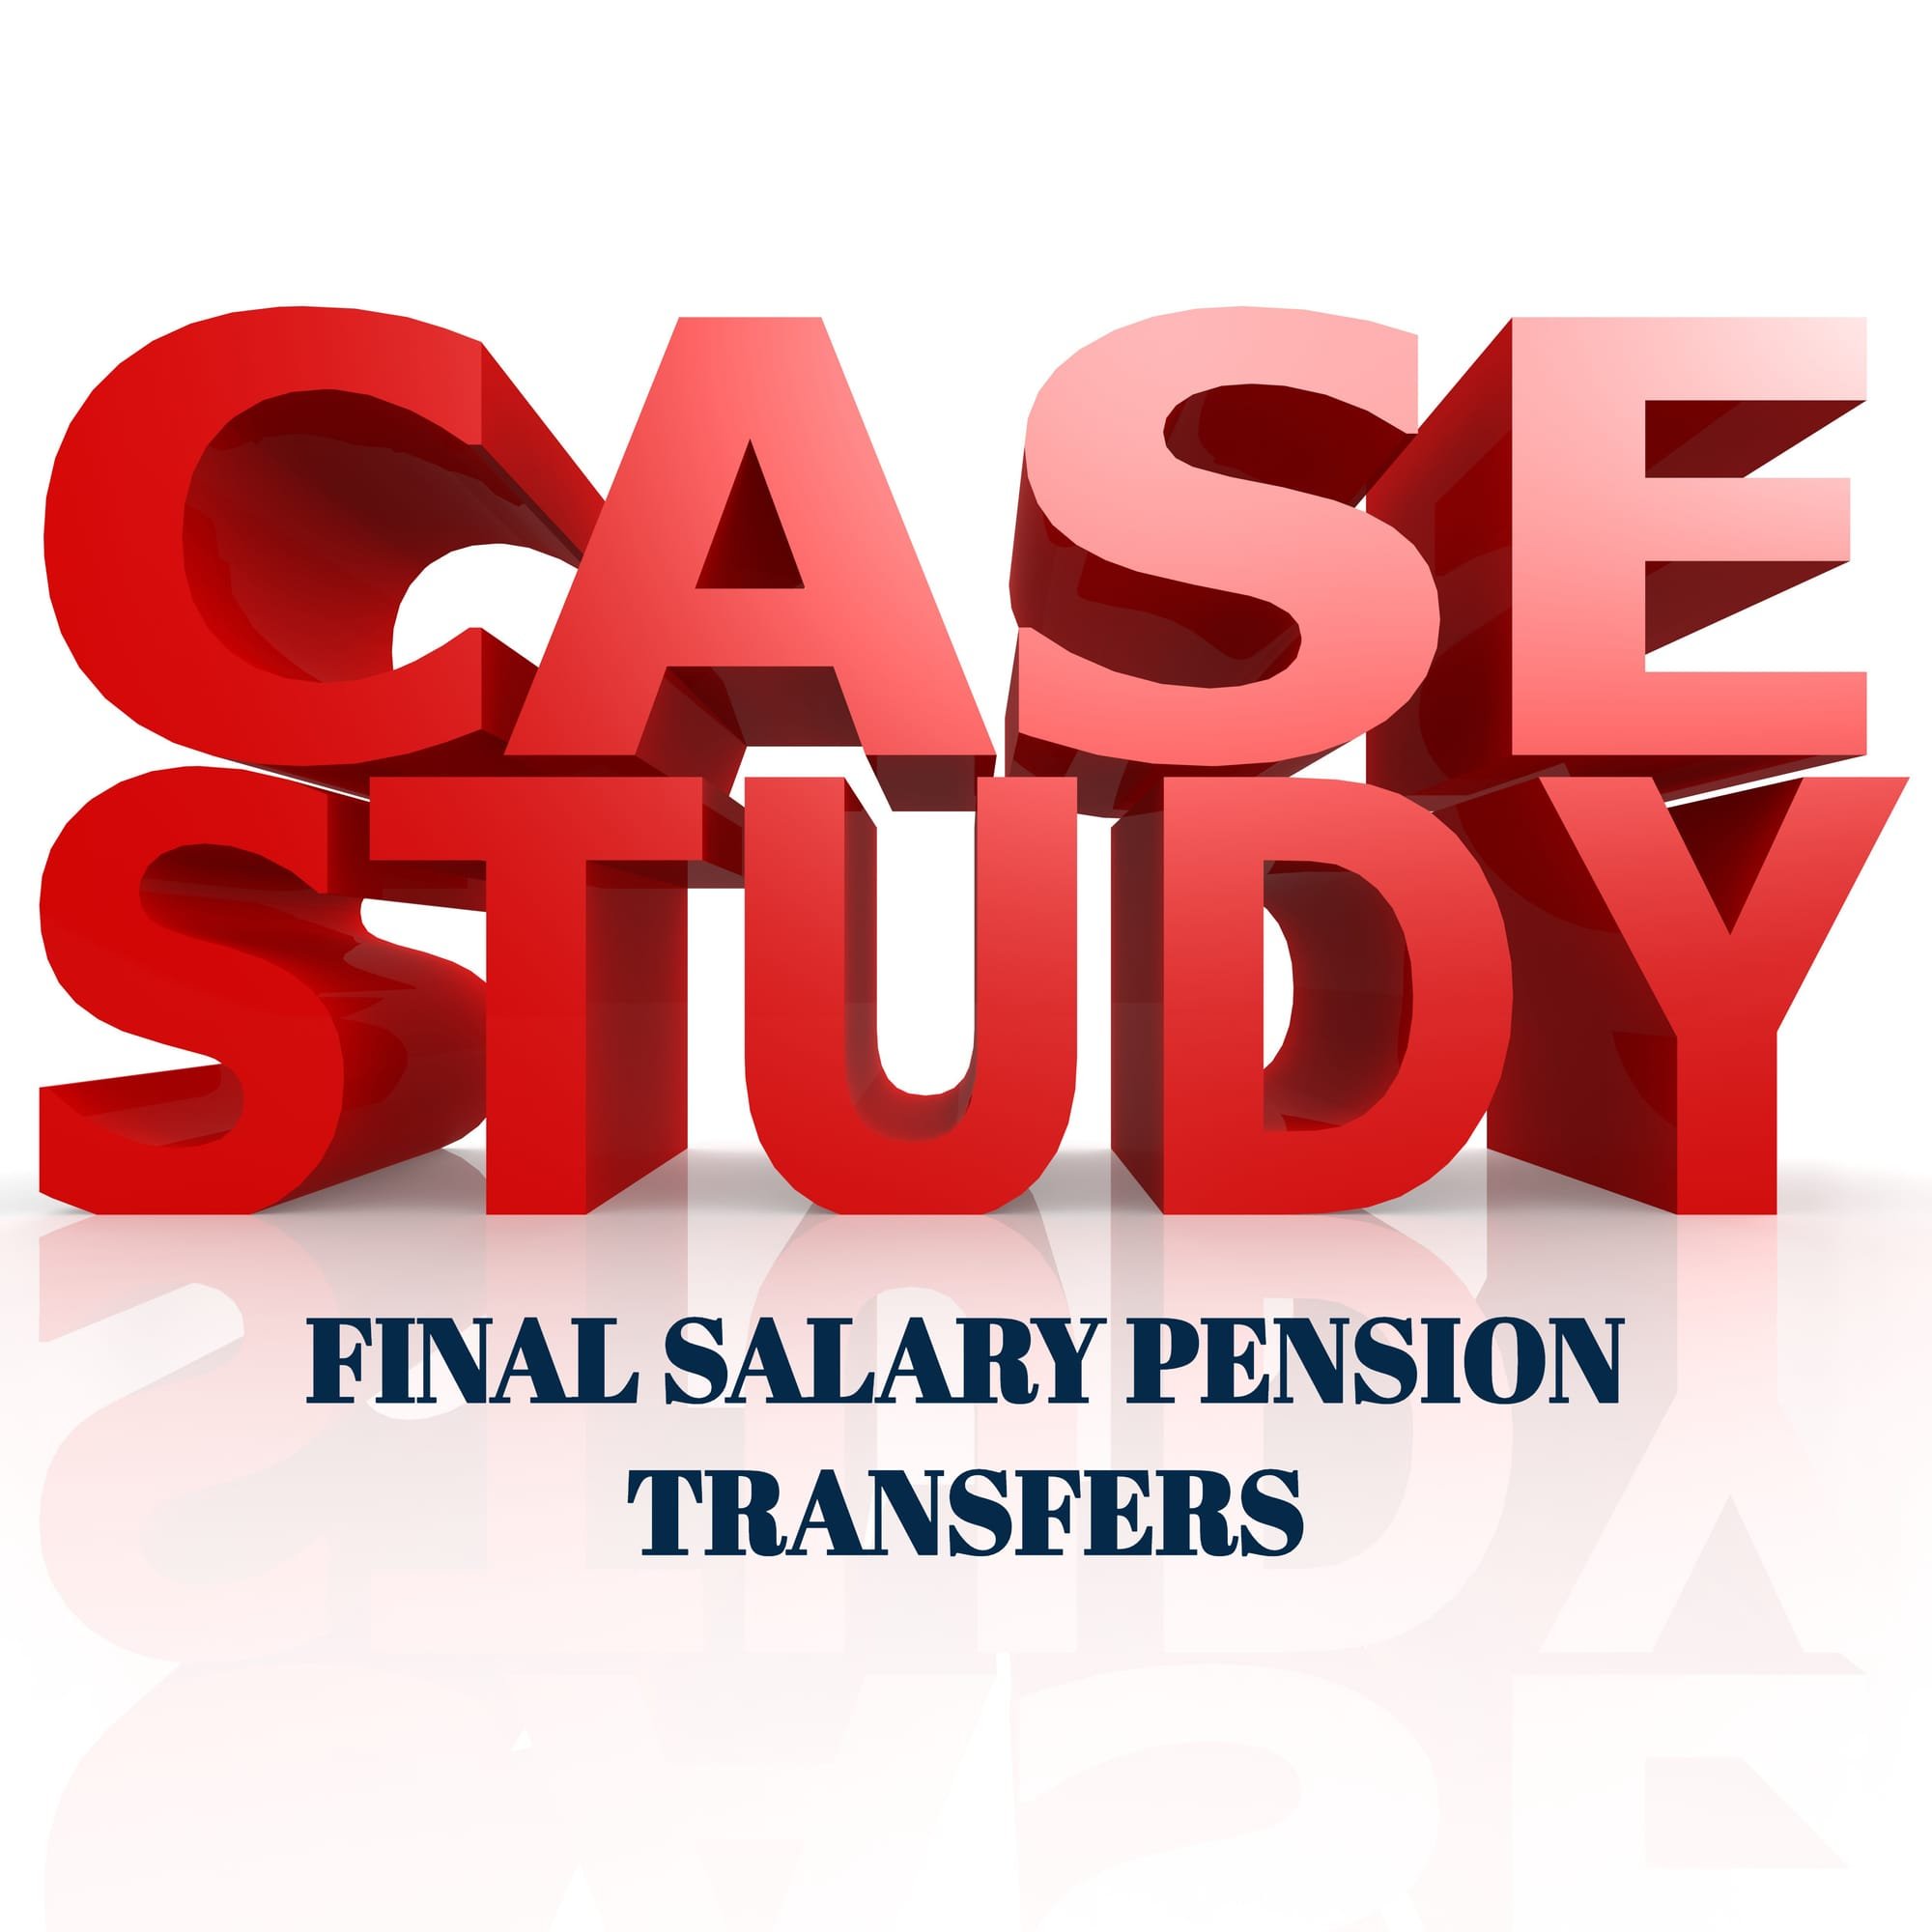 Final Salary Pension Transfers - Client Case Studies (MAY 2020)